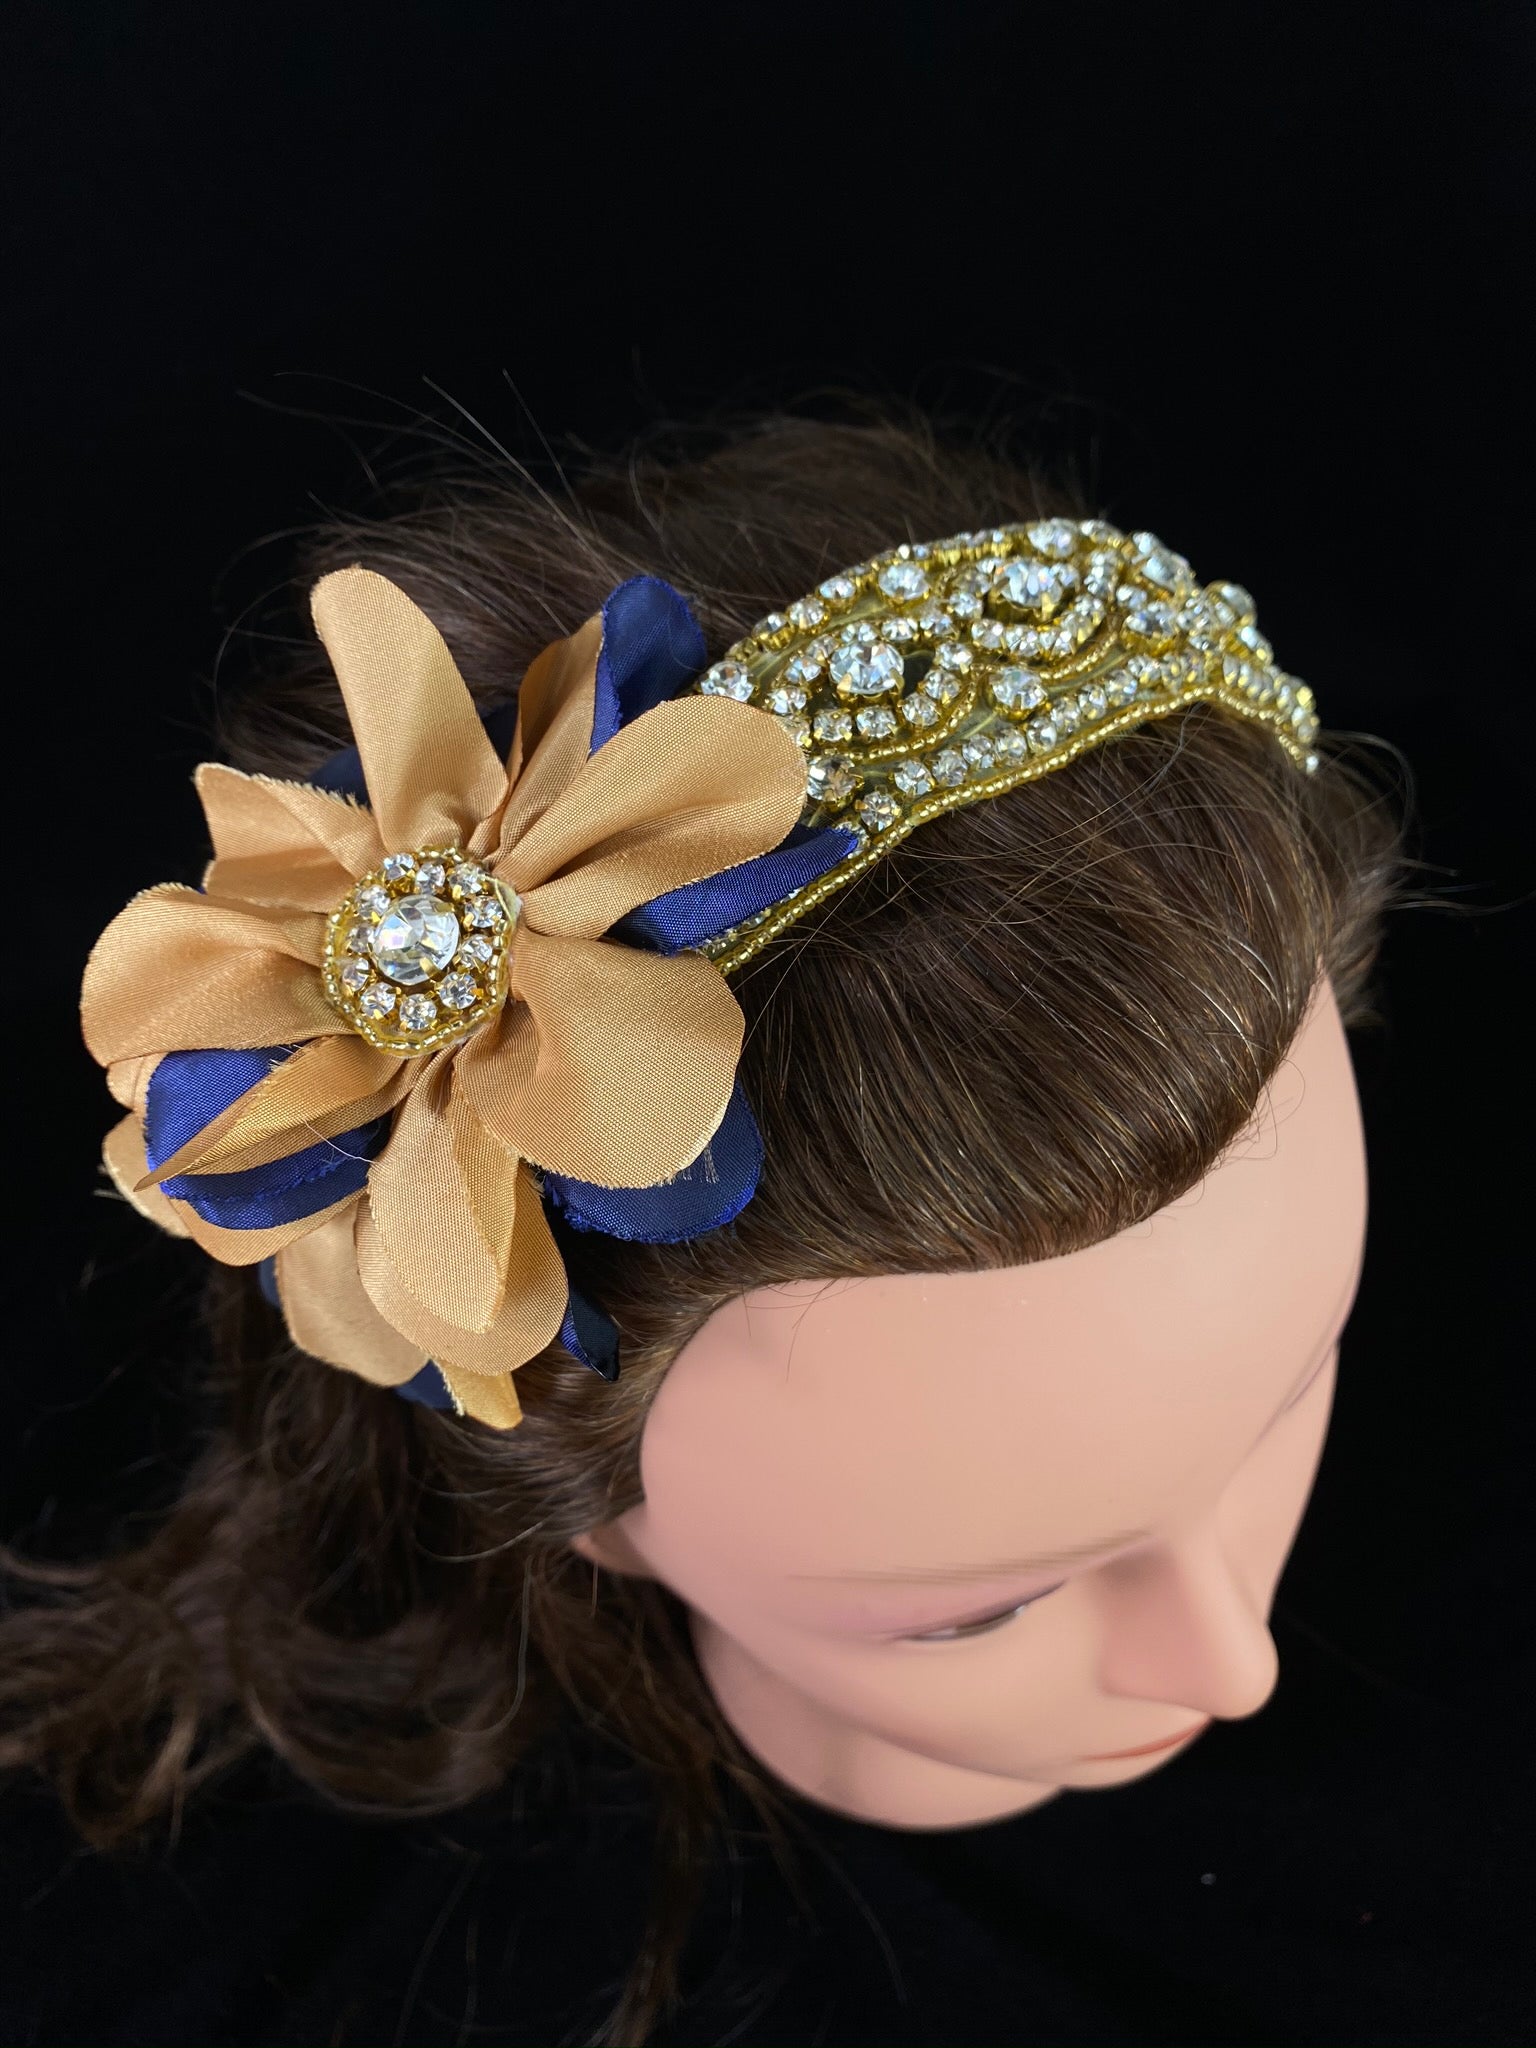 Navy & Gold Rhinestone Headband  This is an elegant handmade and one-of-a-kind headband with a large satin navy and gold flower with gold beads and rhinestones.  The headband is made of an intricate rhinestone and bead design.  This headband can be worn with dresses from Stelalysa's Celebration/Pageant Collection and for any occasion!  It fits best on girls ages 1-6.